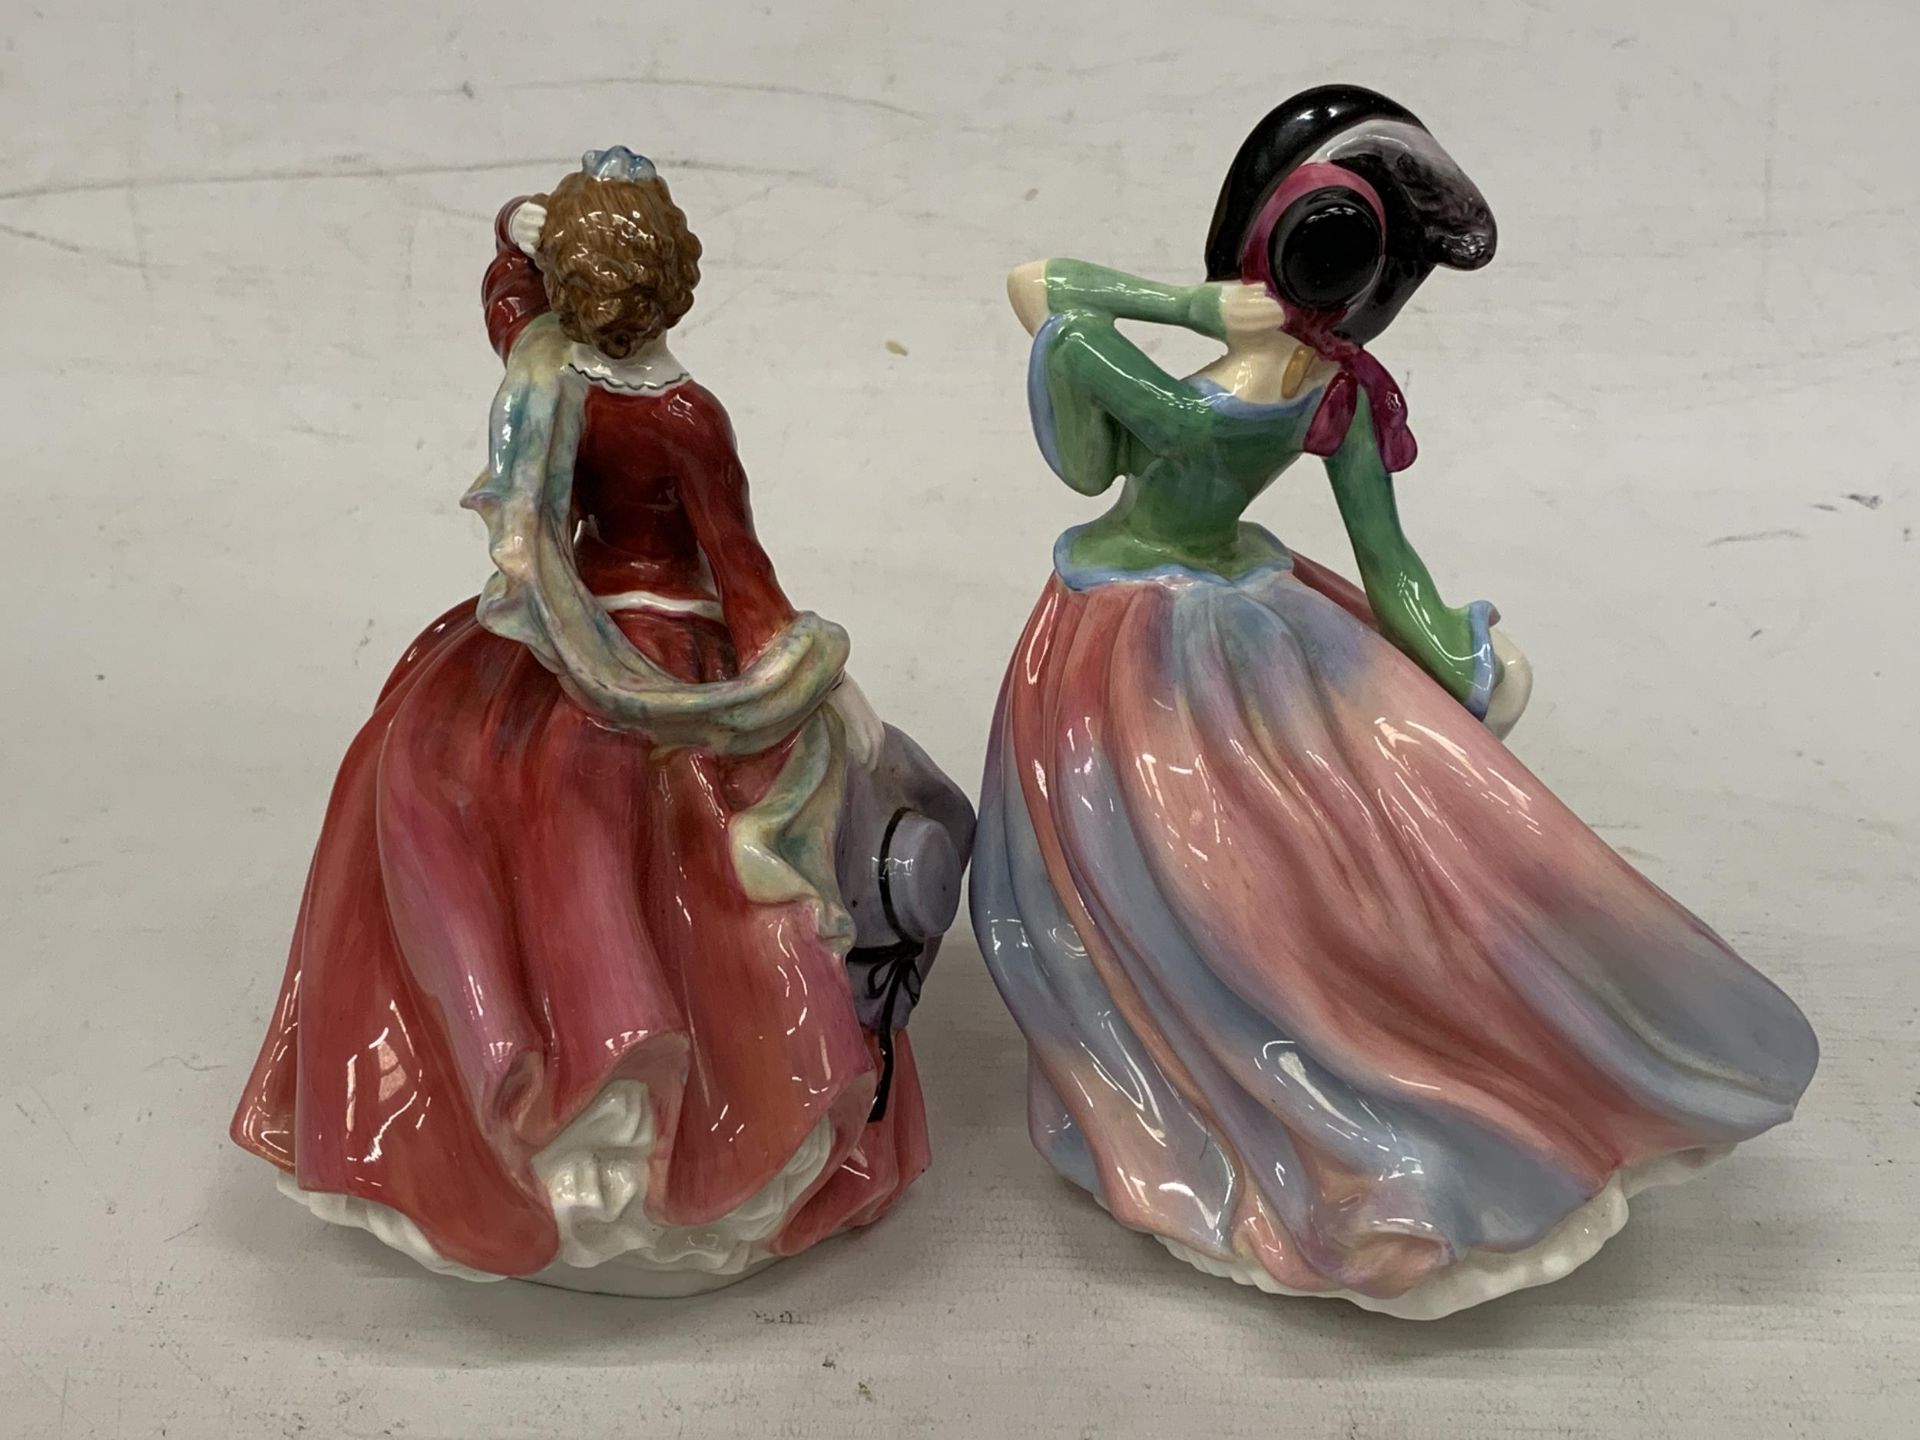 TWO ROYAL DOULTON FIGURINES "AUTUMN BREEZES" HN 1911 AND "BLITHE MORNING" HB 2045 - Image 3 of 5